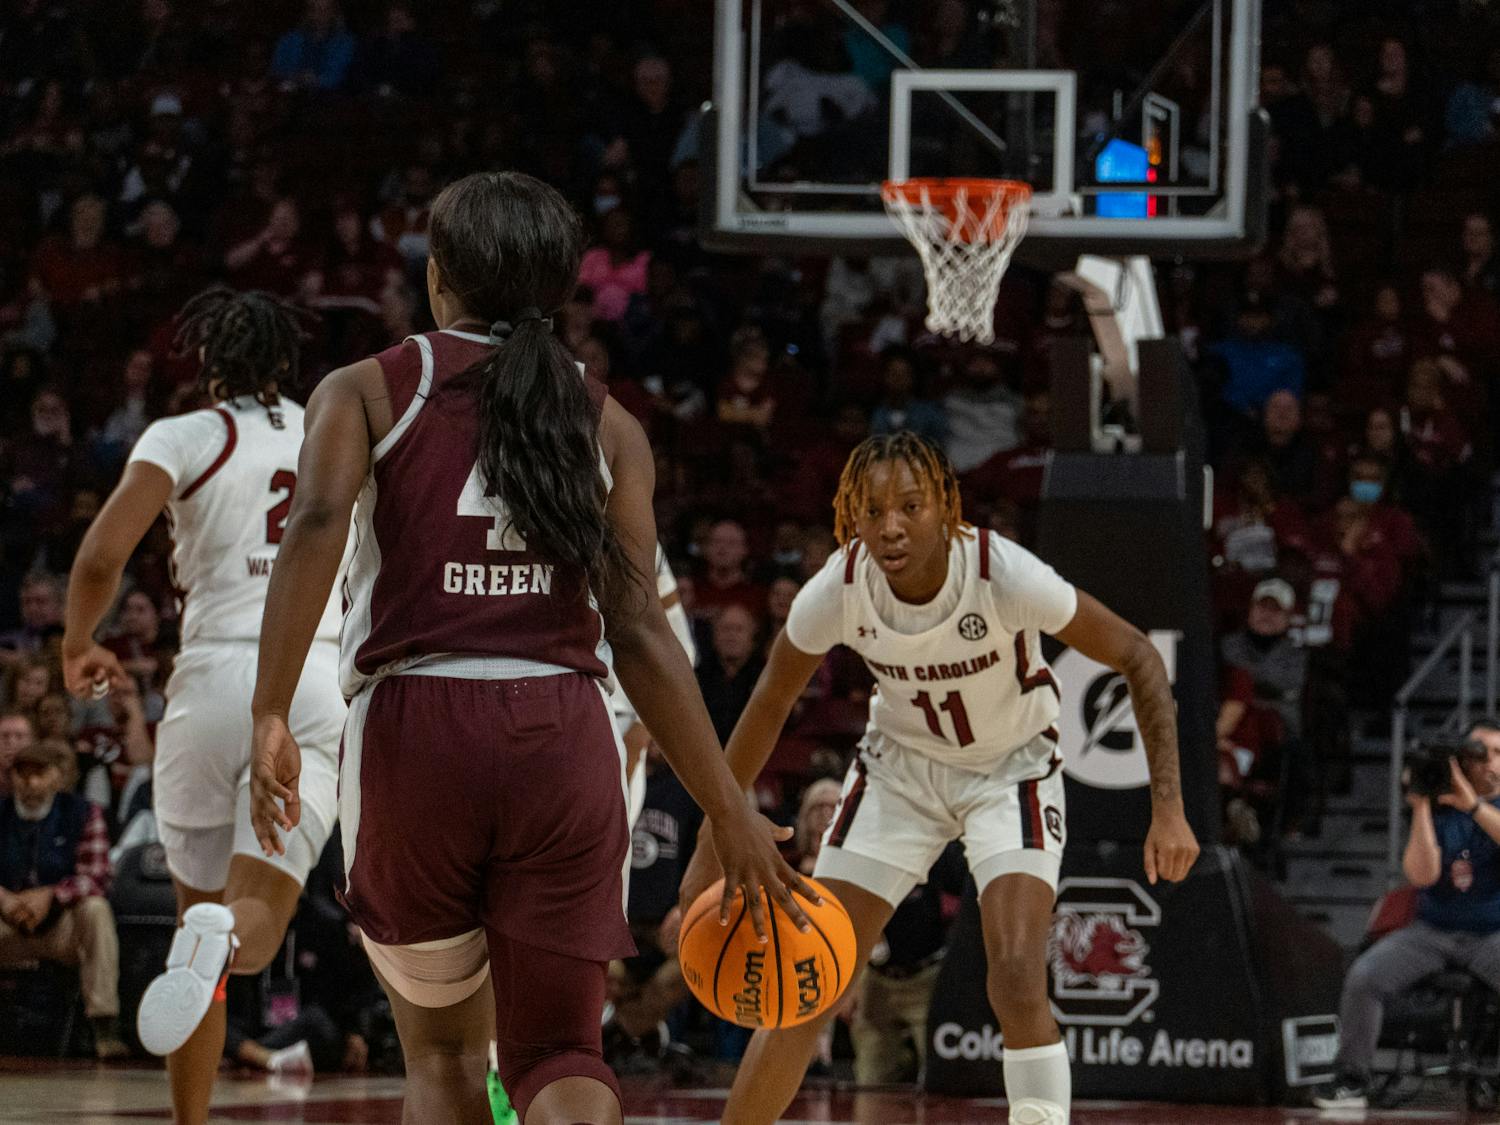 Freshman guard Talaysia Cooper guards against a Texas A&amp;M forward to halt her opponent’s drive to the basket on Dec. 29, 2022. The Gamecocks defeated the Aggies 76-34 in its SEC-opener. &nbsp;